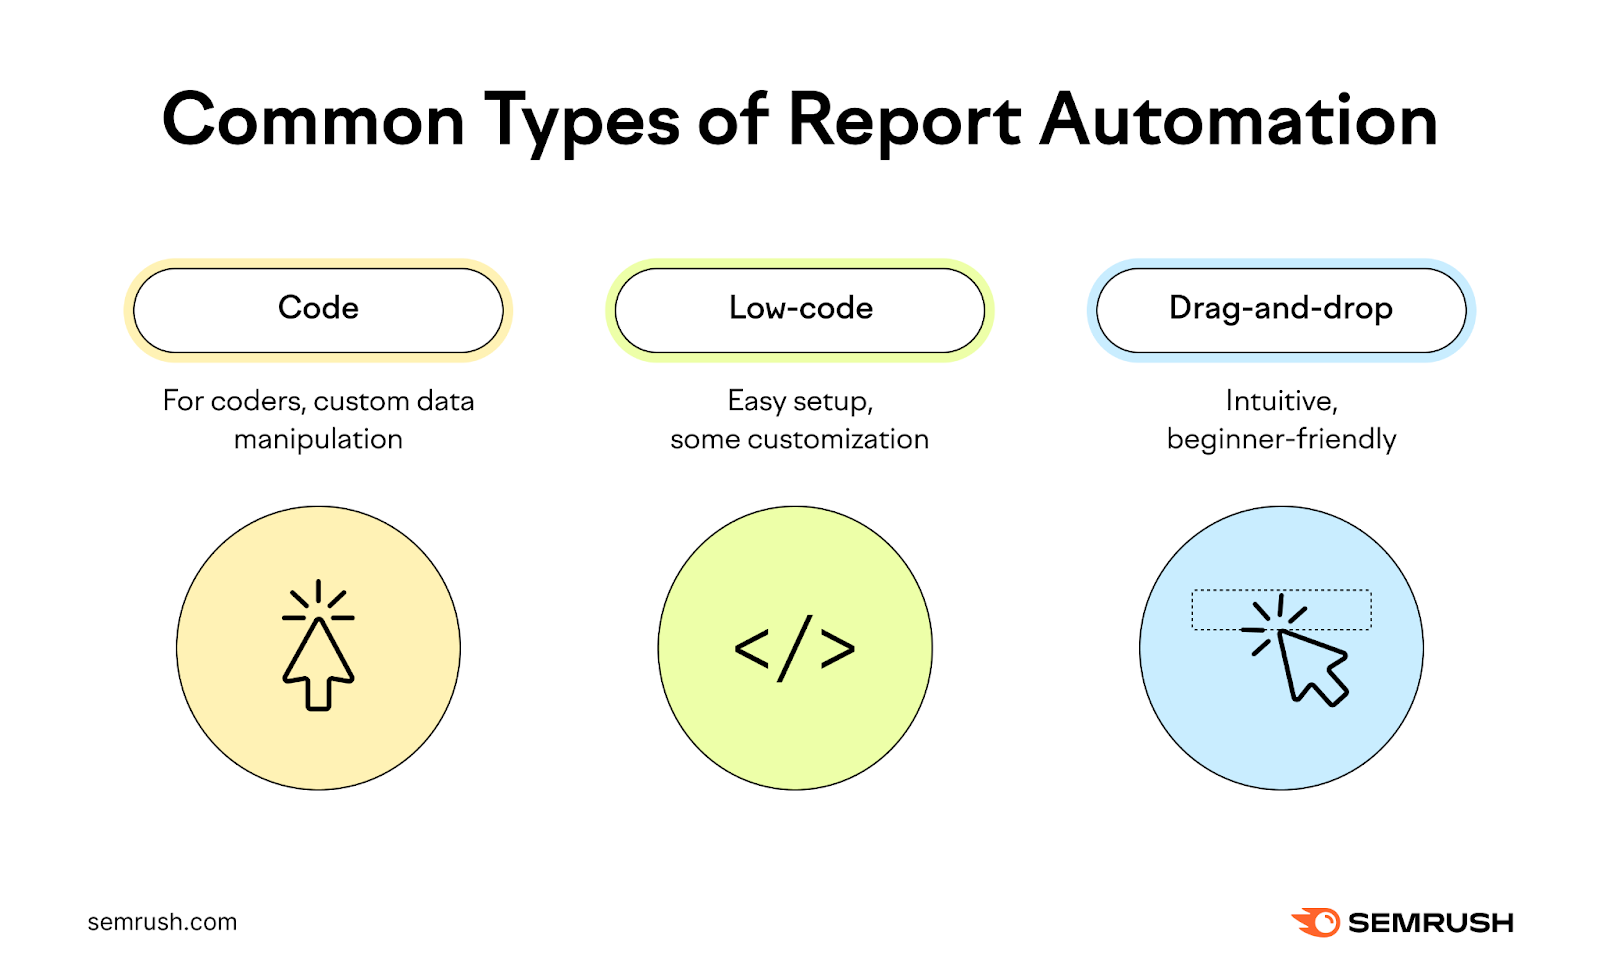 Common types of report automation, including code, low-code and drag-and-drop